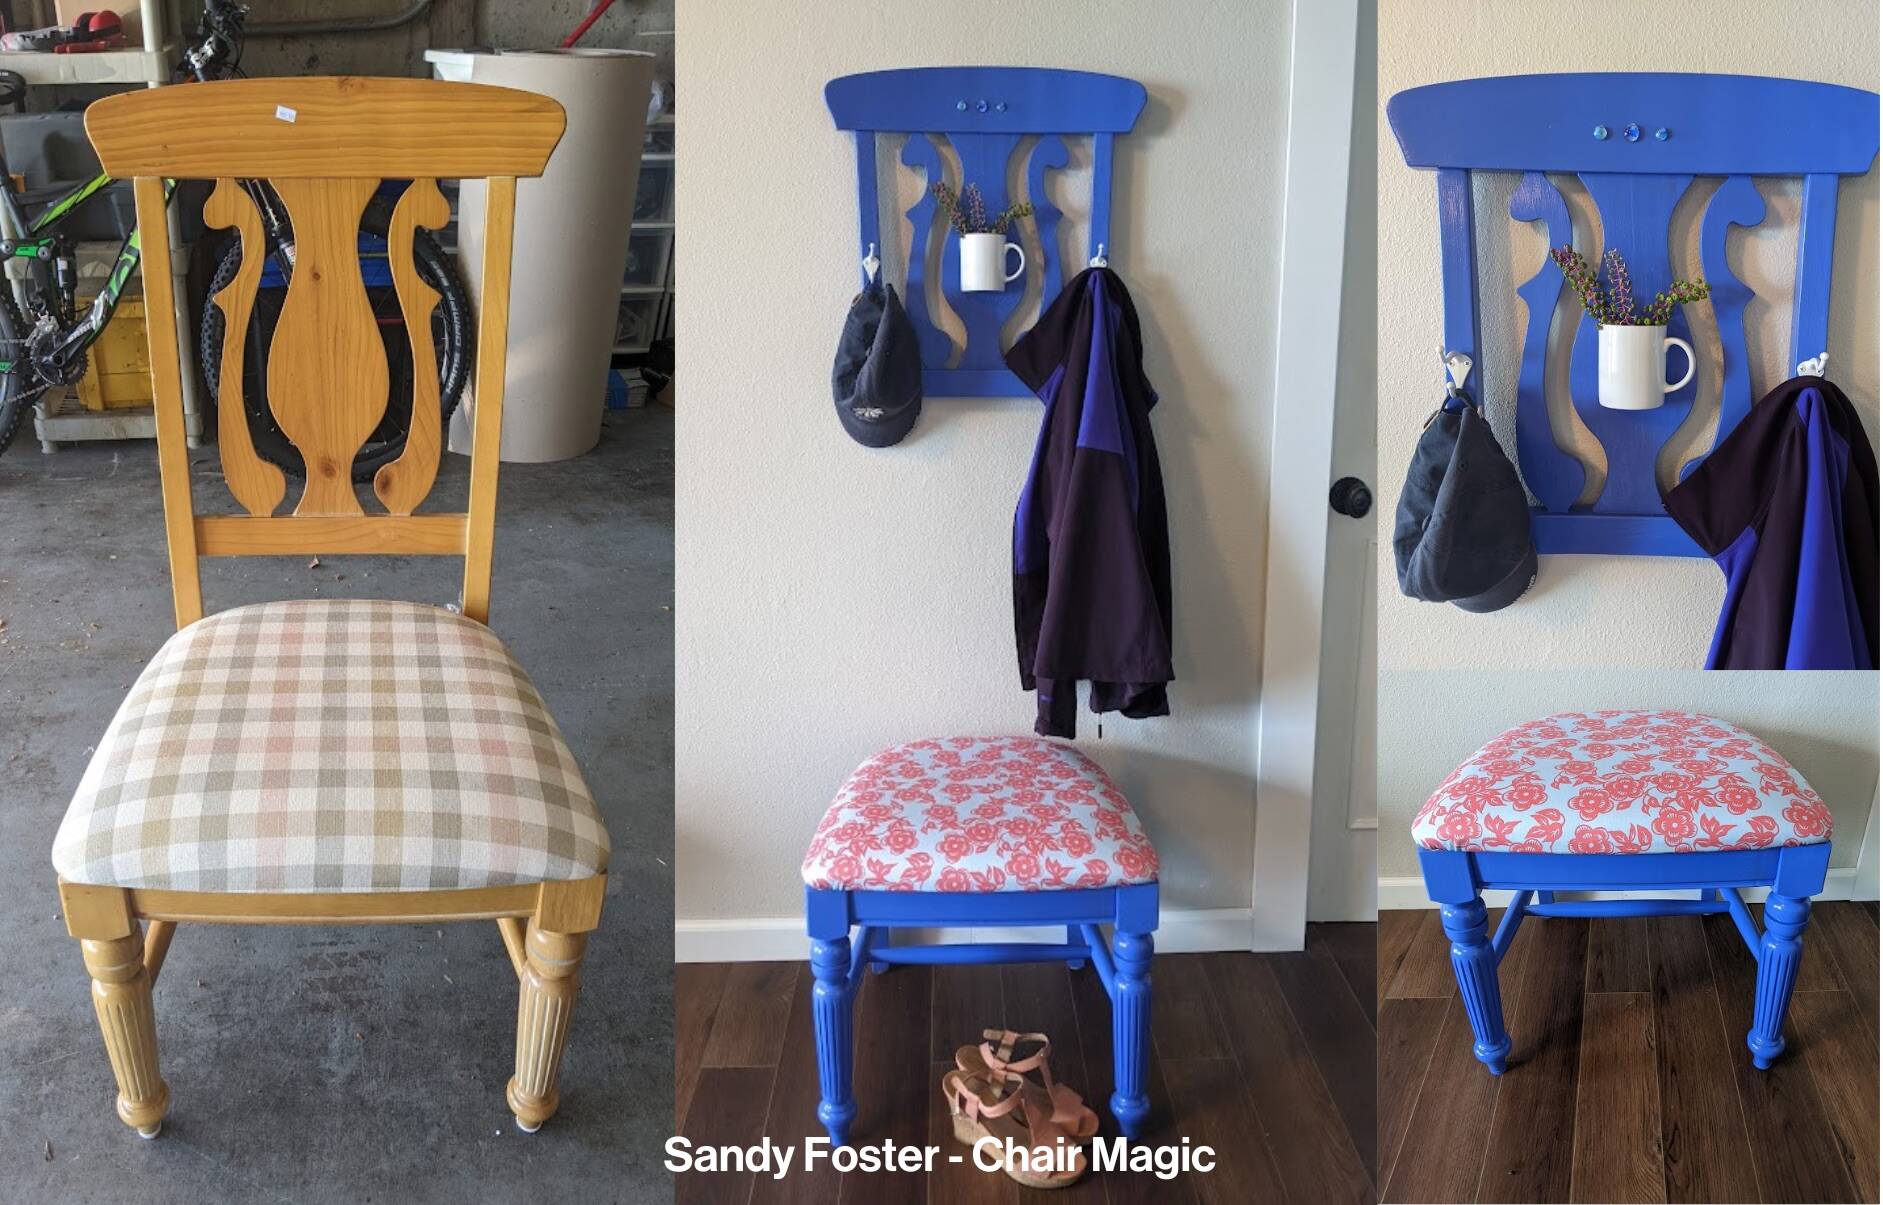 Photos provided
Artist Sandy Foster upcycled an old chair to create a decorative entryway unit with a seat for putting on shoes and hooks for hanging bags or keys. This and other items will be available for auction on Sept. 24.